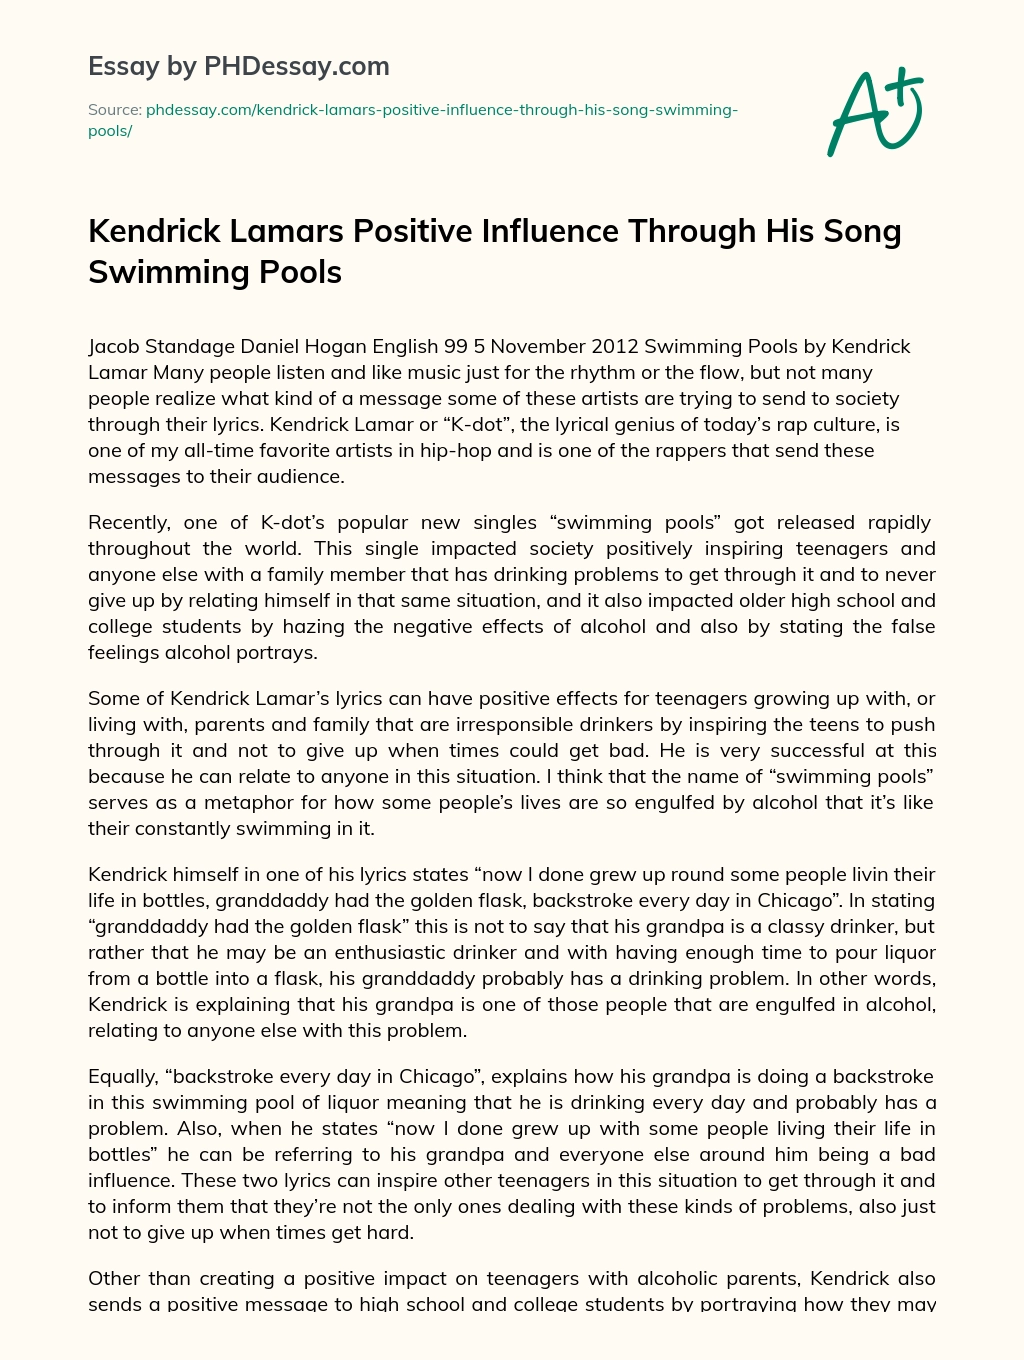 Kendrick Lamars Positive Influence Through His Song Swimming Pools essay